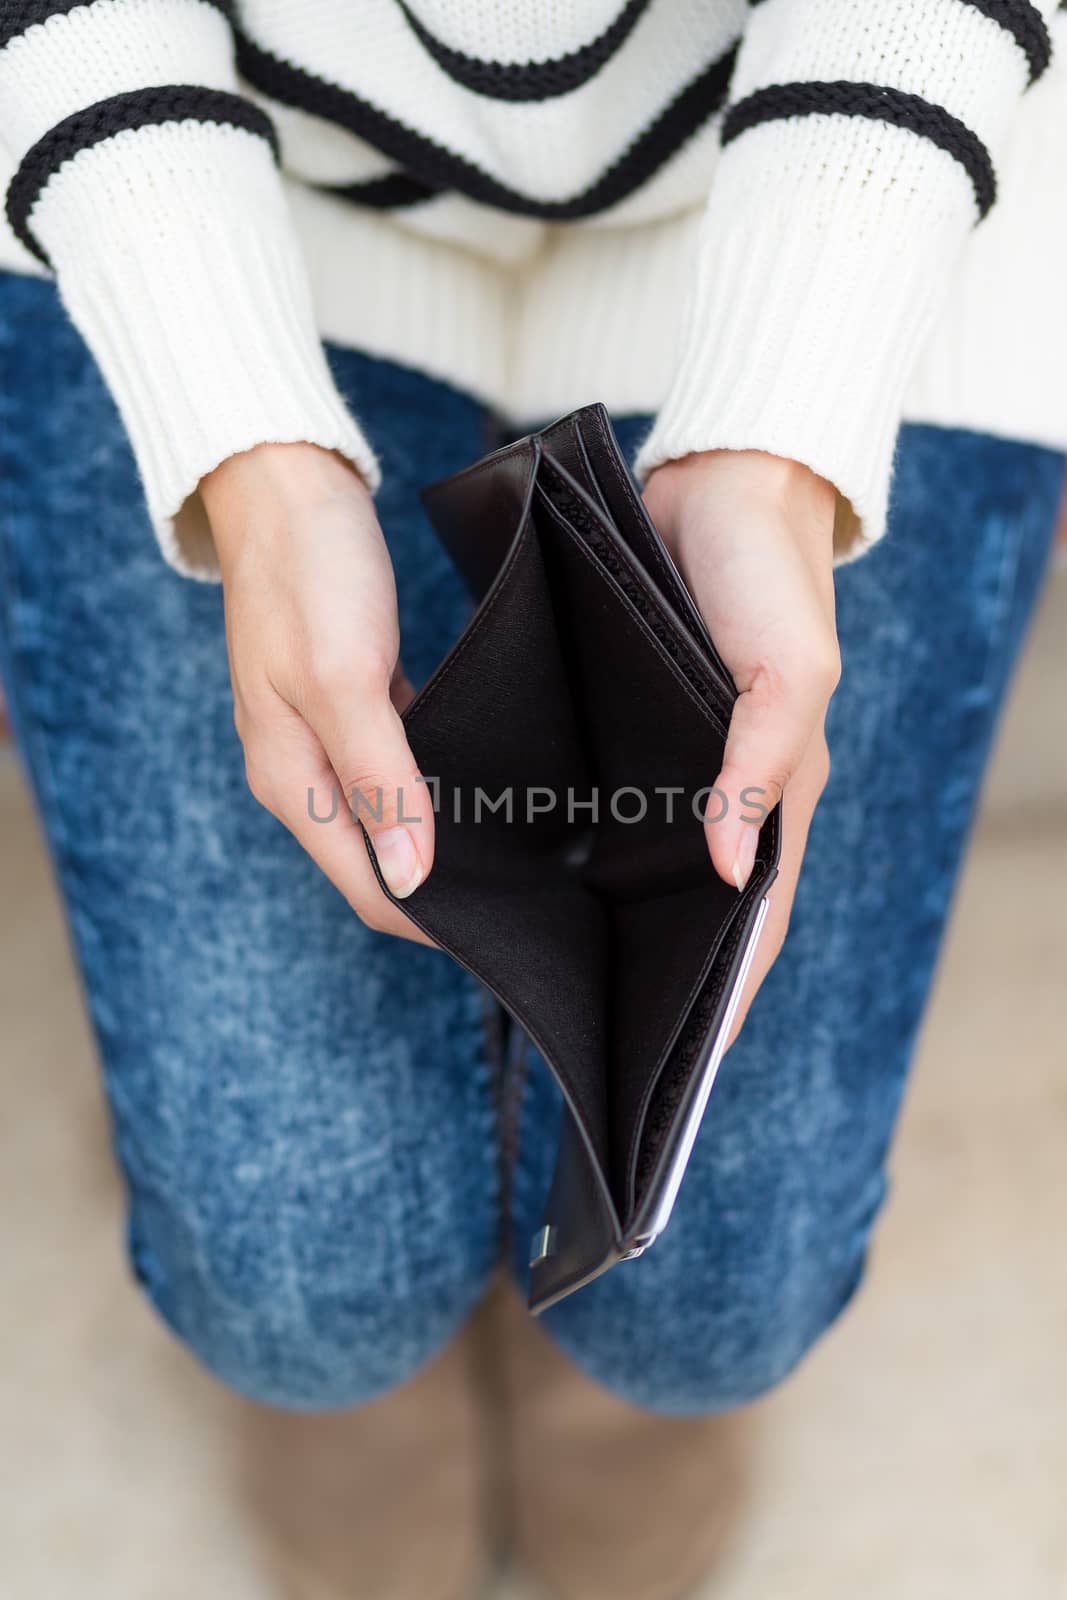 Woman with an empty wallet